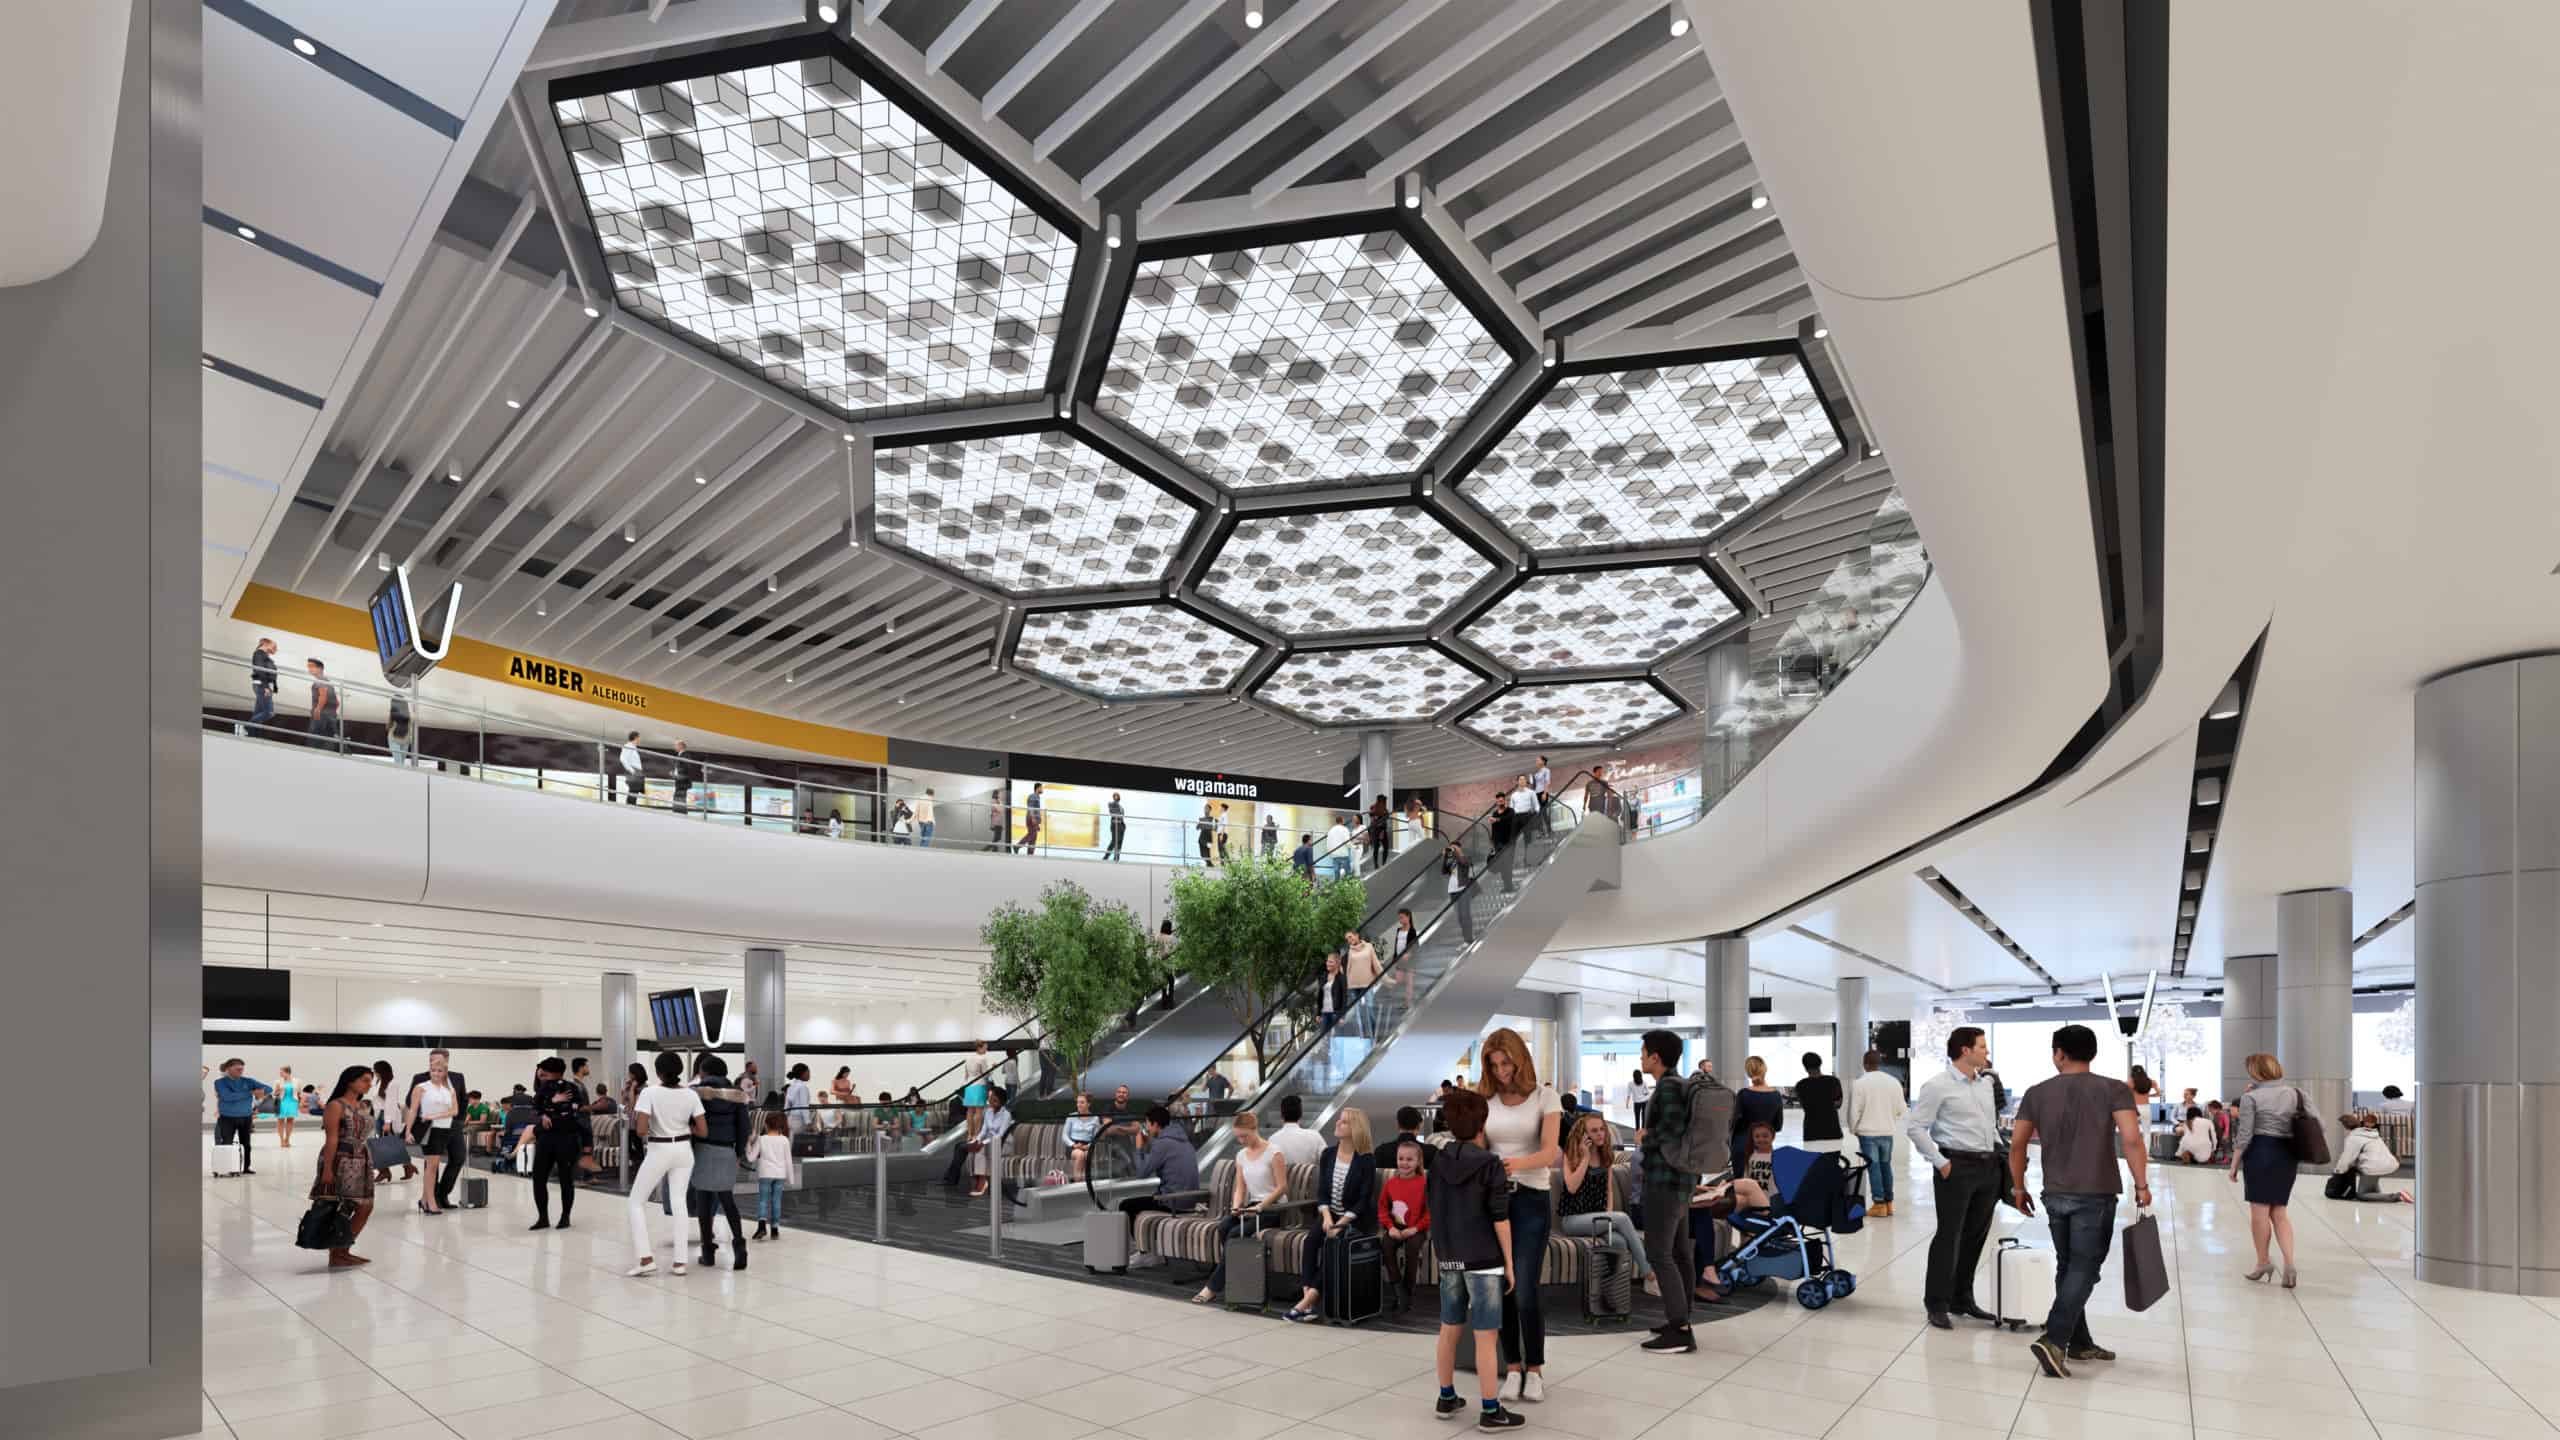 Manchester Airport offers glimpse of new stores and restaurants at transformed terminal